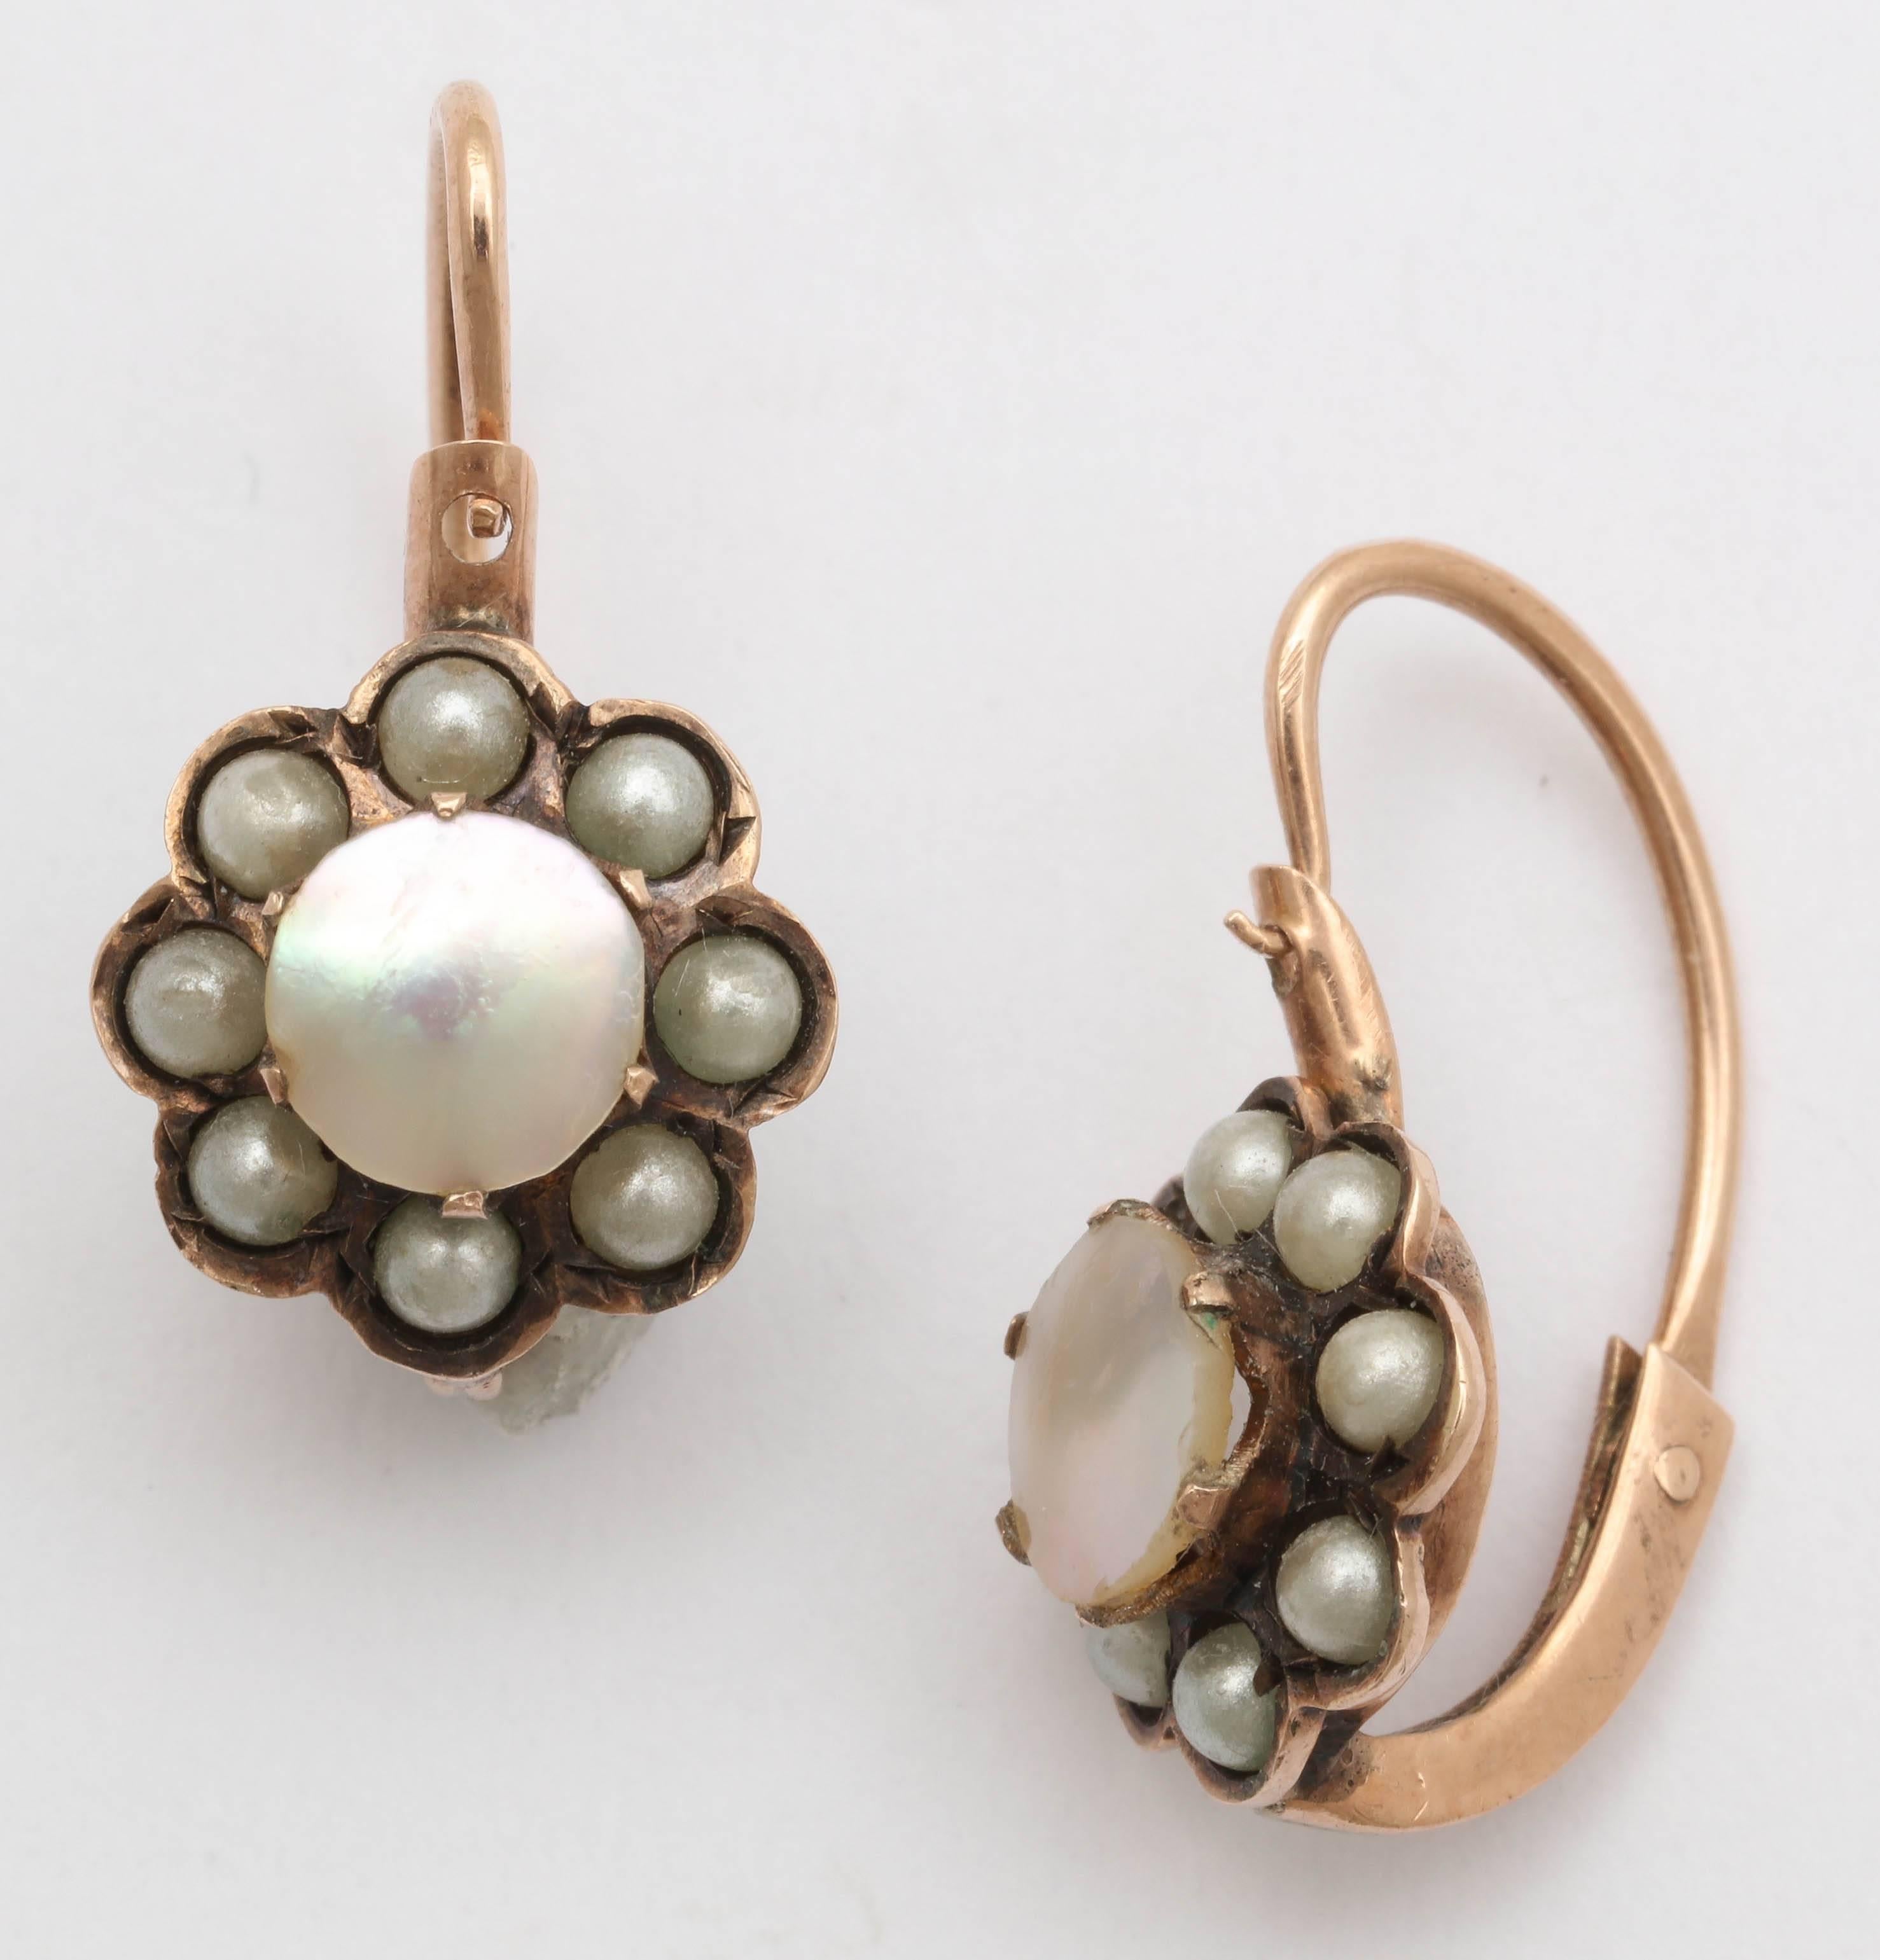 Perfect for everyday, these cluster earrings are14K rose gold with mother of pearl centers surrounded by eight seed pearls. They date to the late Victorian era and are American in origin. 